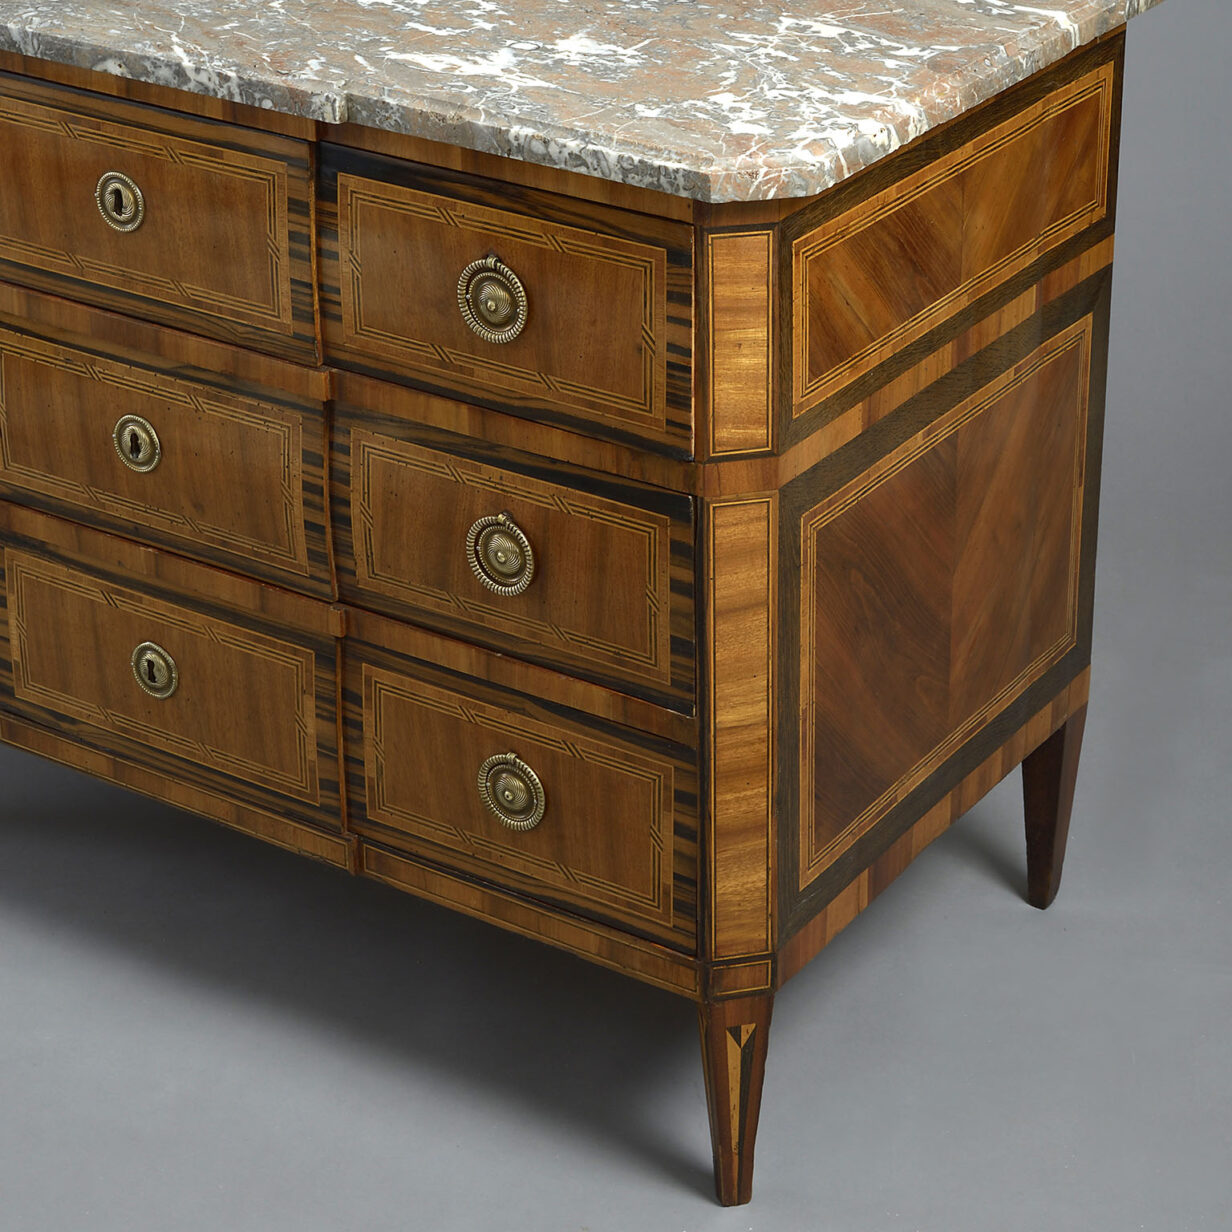 Late 18th century parquetry inlaid commode